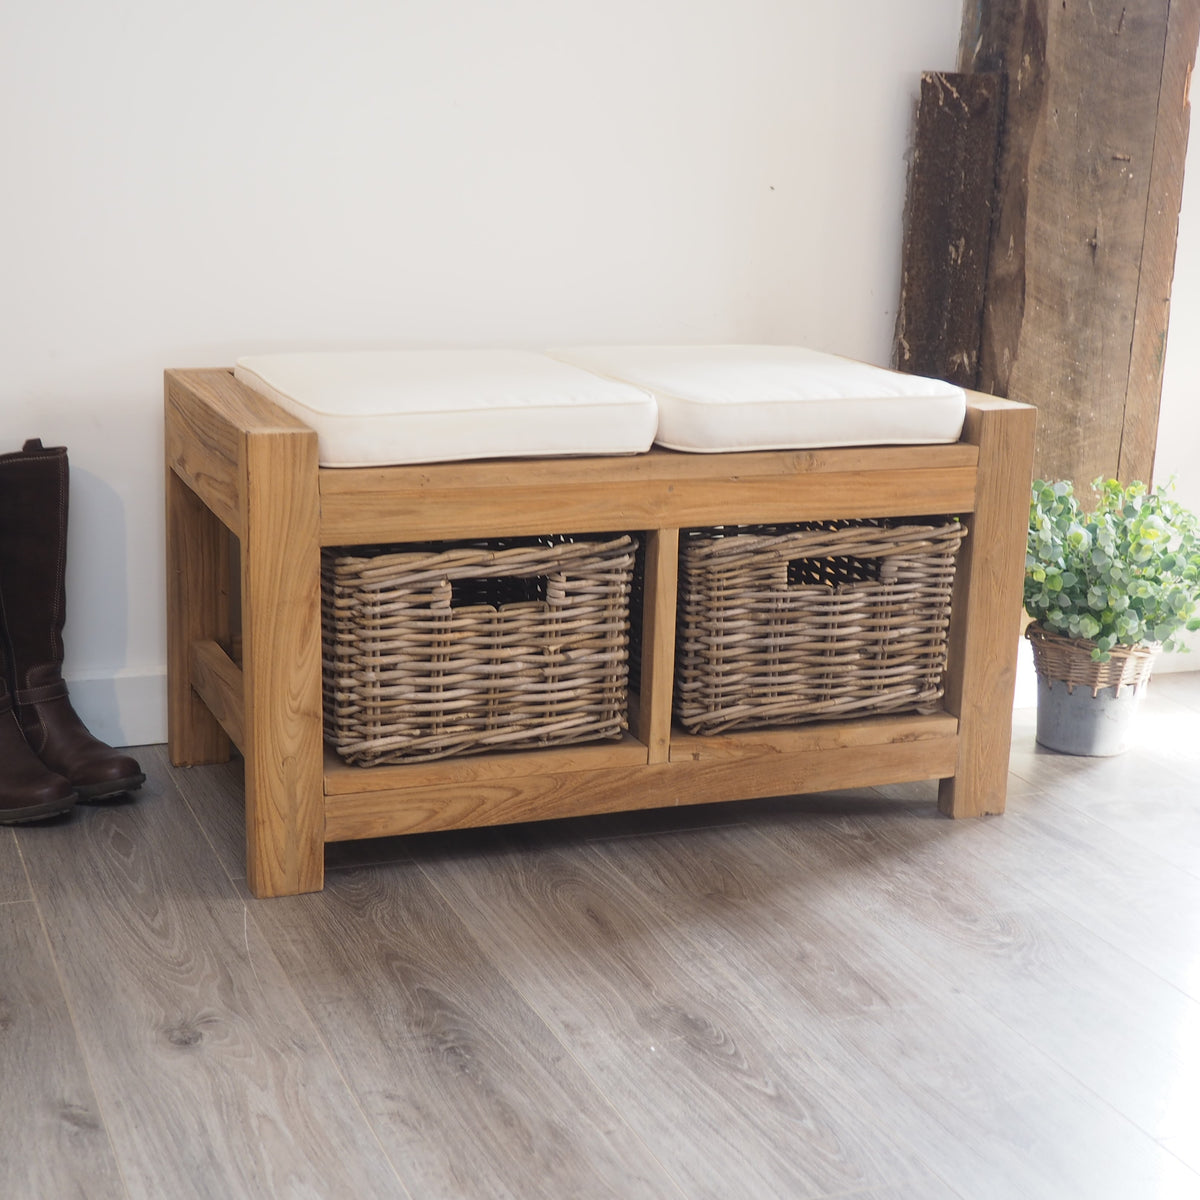 Hallway Storage Bench With Wicker Drawers - 2 Seater – Rustic House